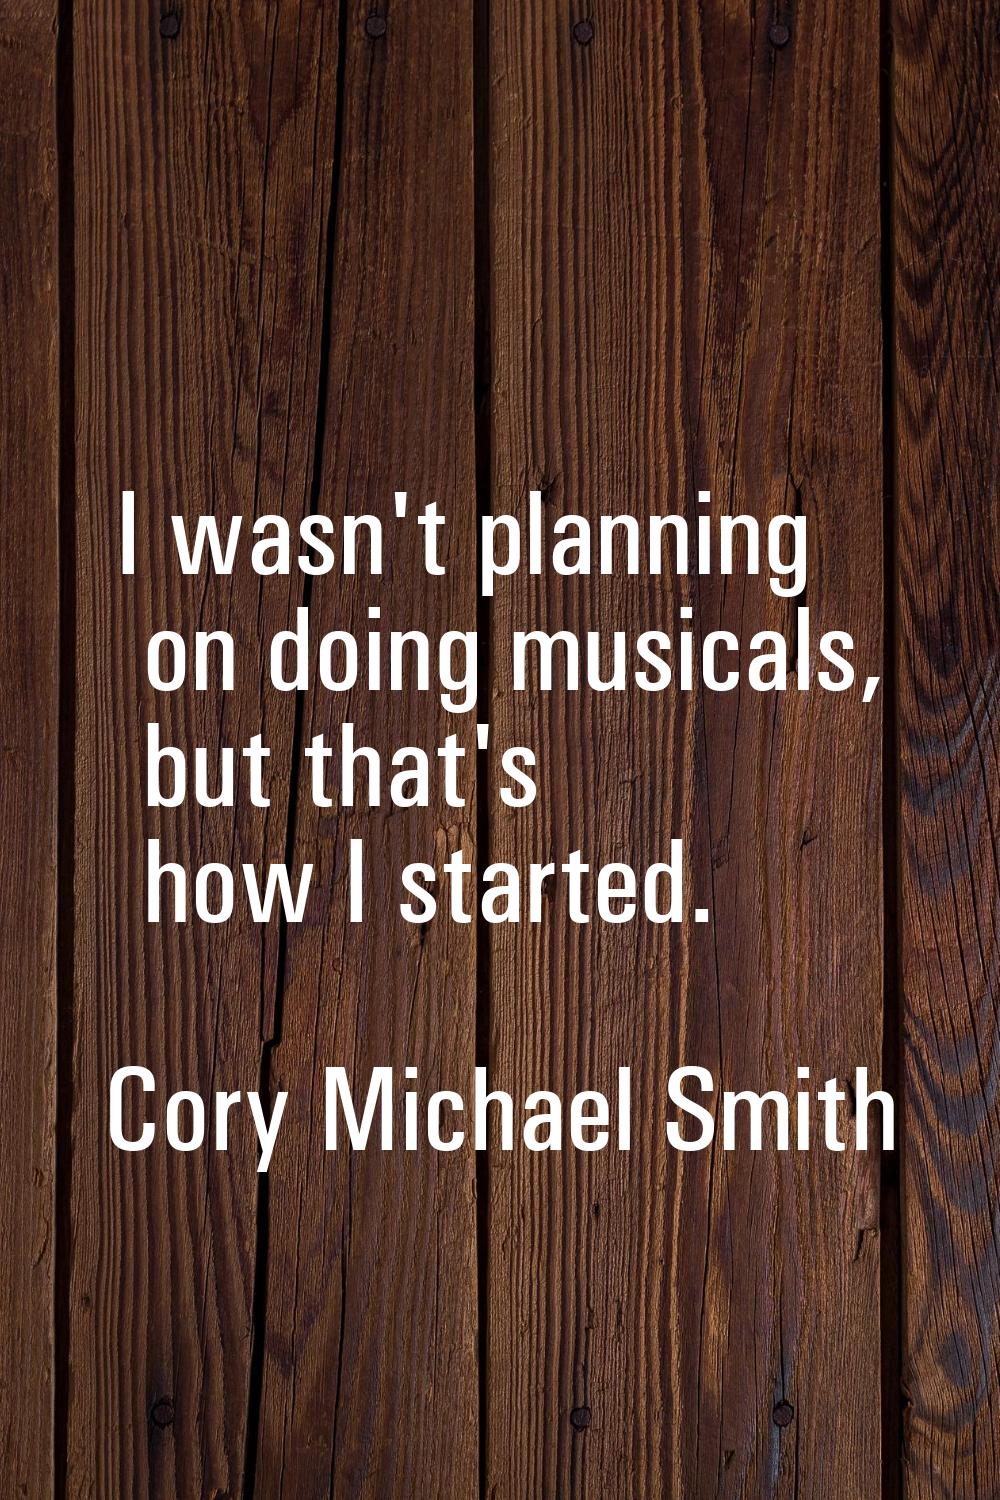 I wasn't planning on doing musicals, but that's how I started.